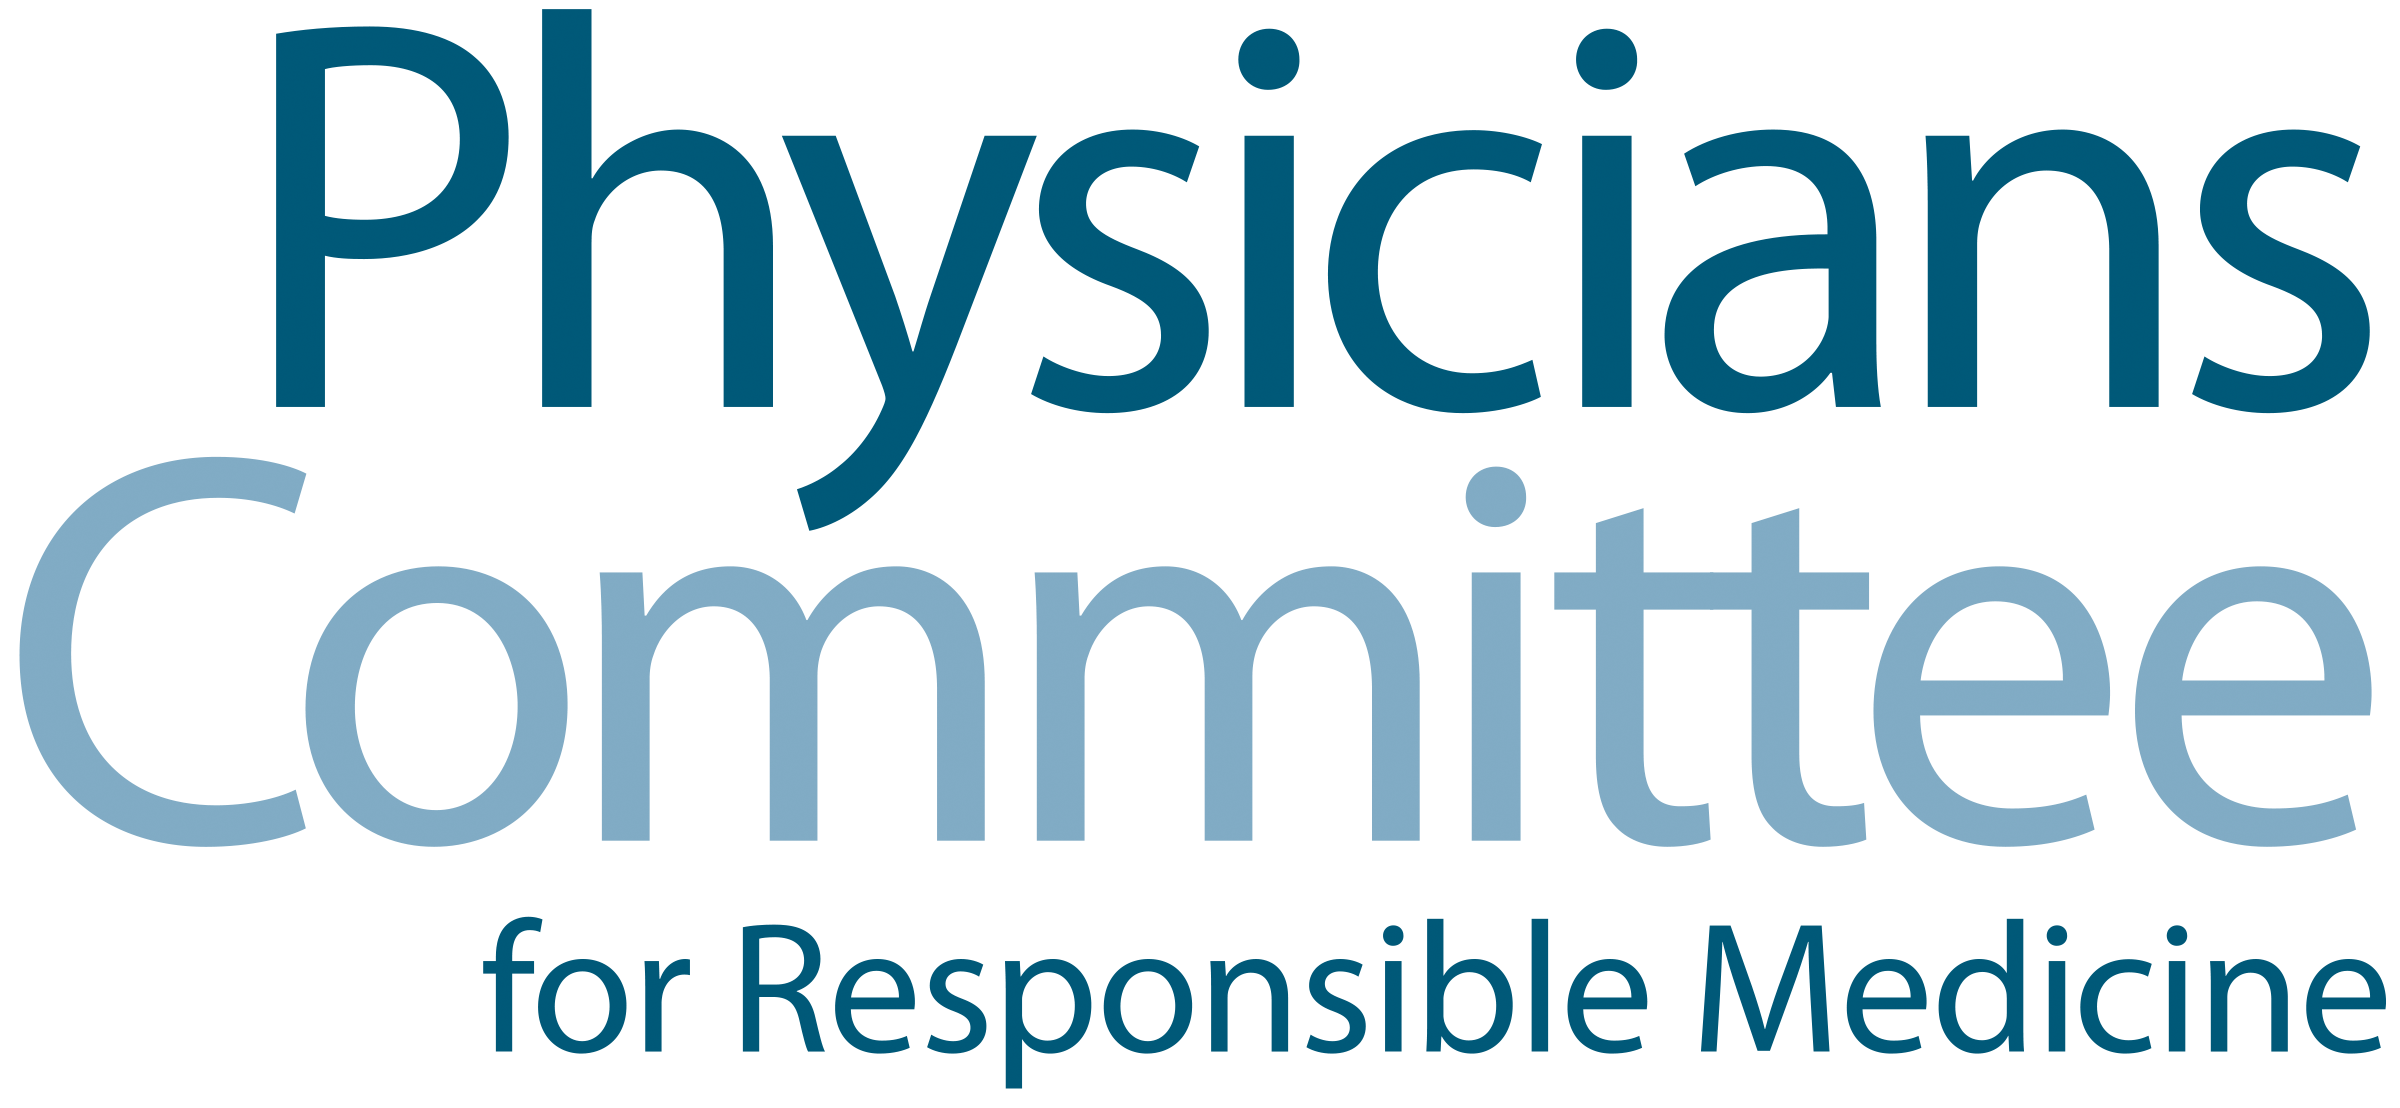 Physicians Committee for Responsible Medicine